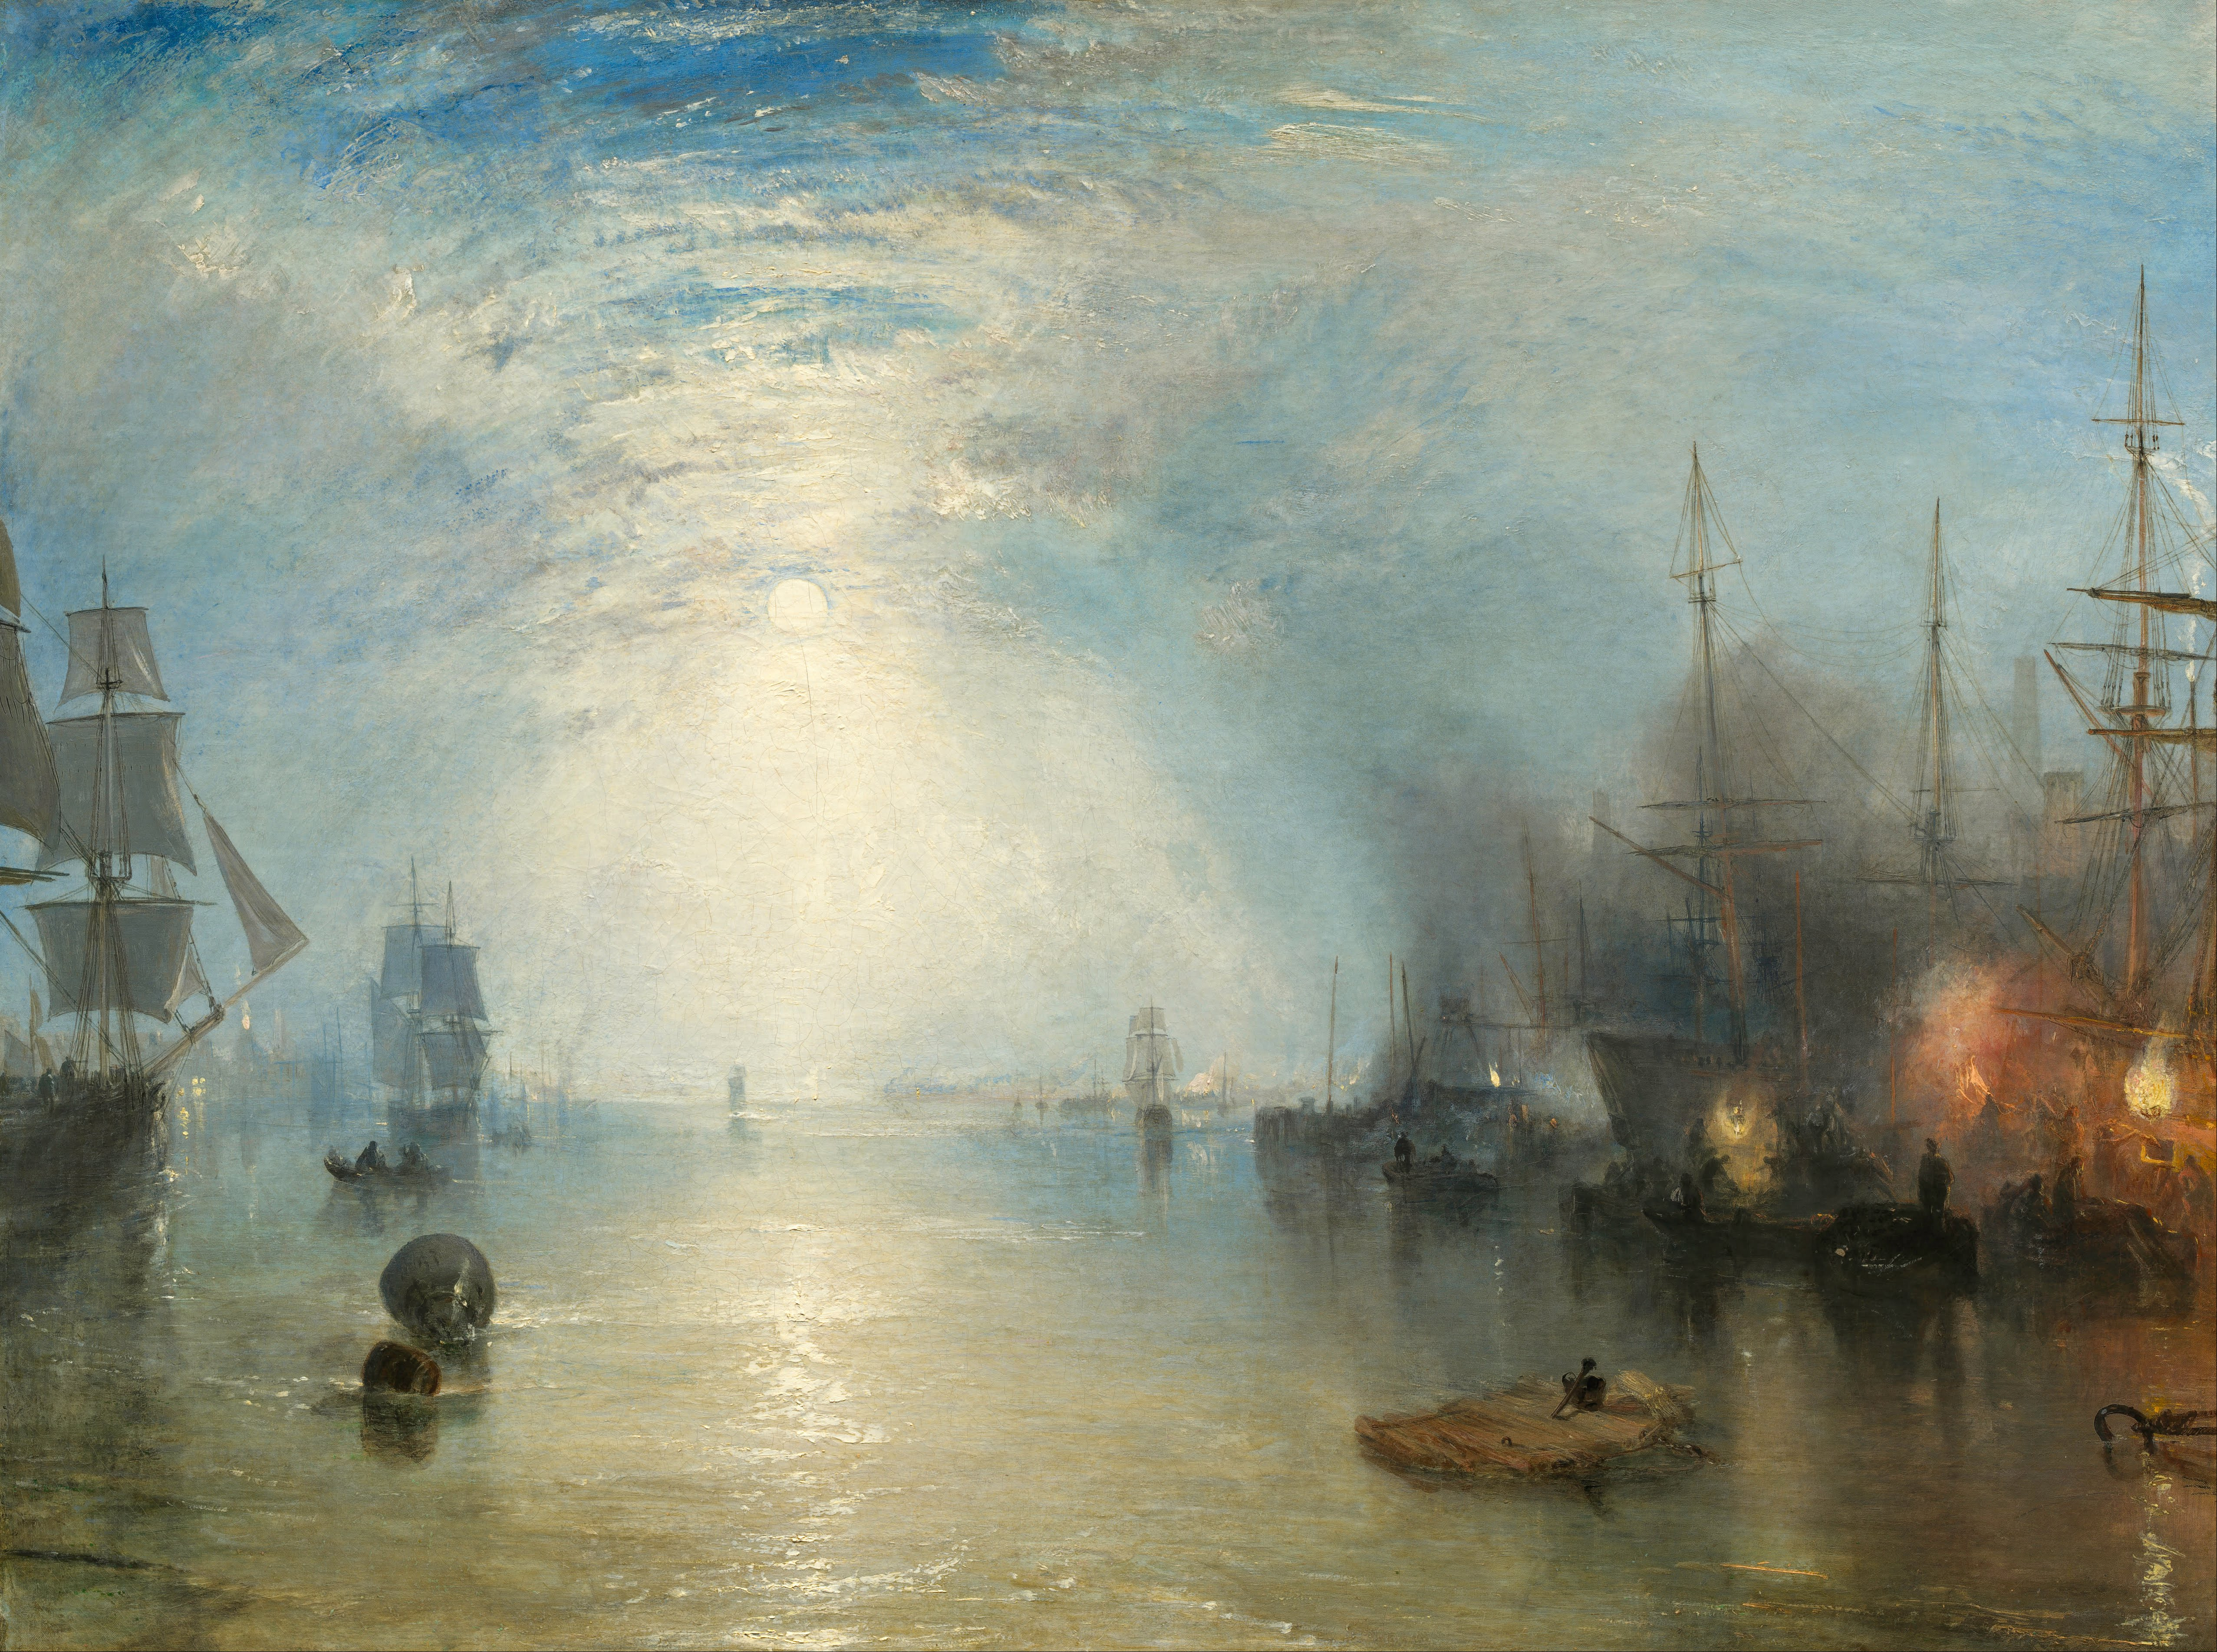 Keelmen Heaving in Coals by Moonlight by Joseph Mallord William Turner - 1835 - 92.3 x 122.8 cm National Gallery of Art